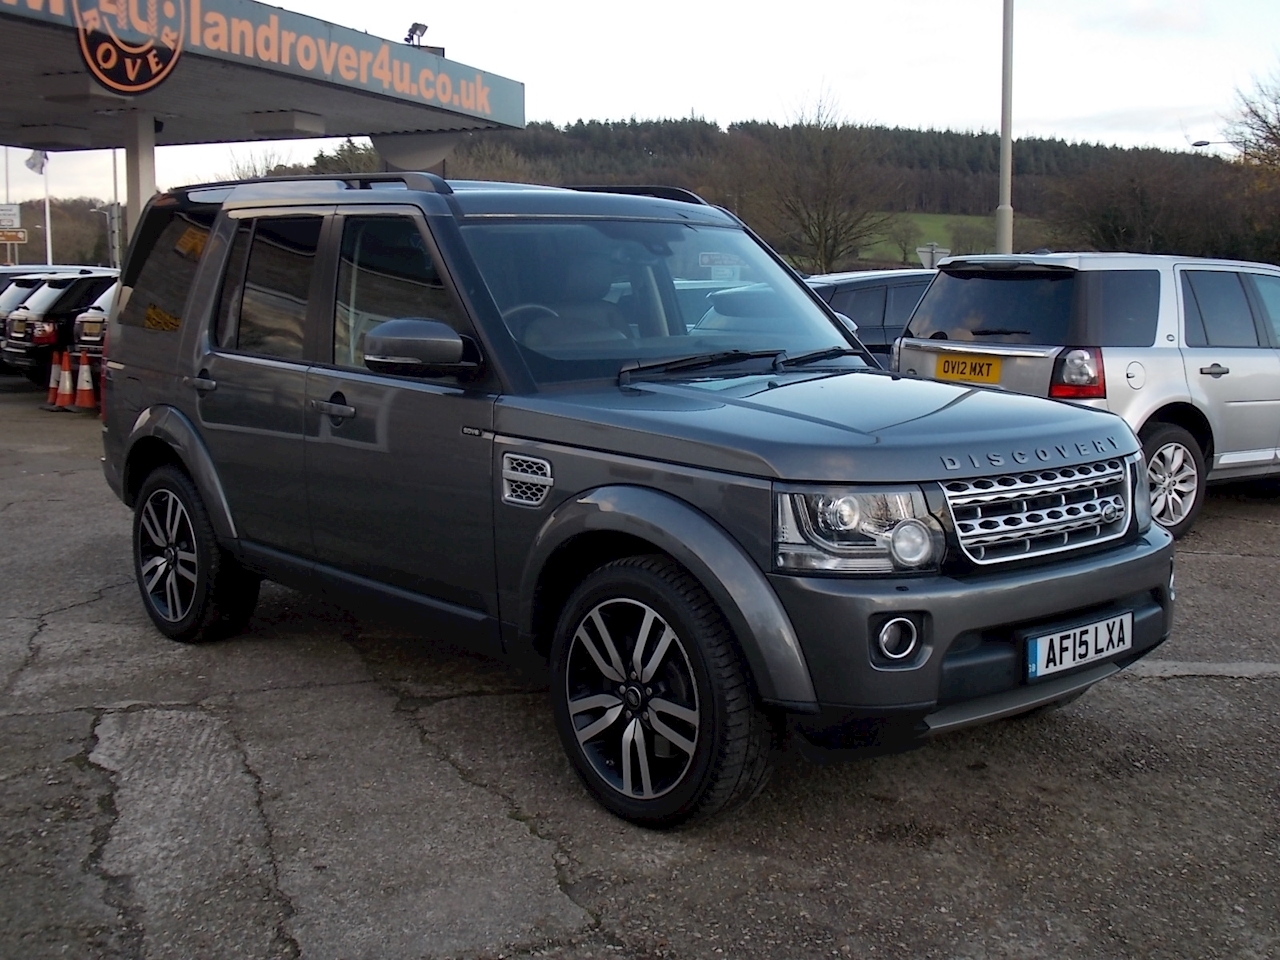 Used Land Rover Discovery 4 HSE Luxury Sdv6 8 Speed East